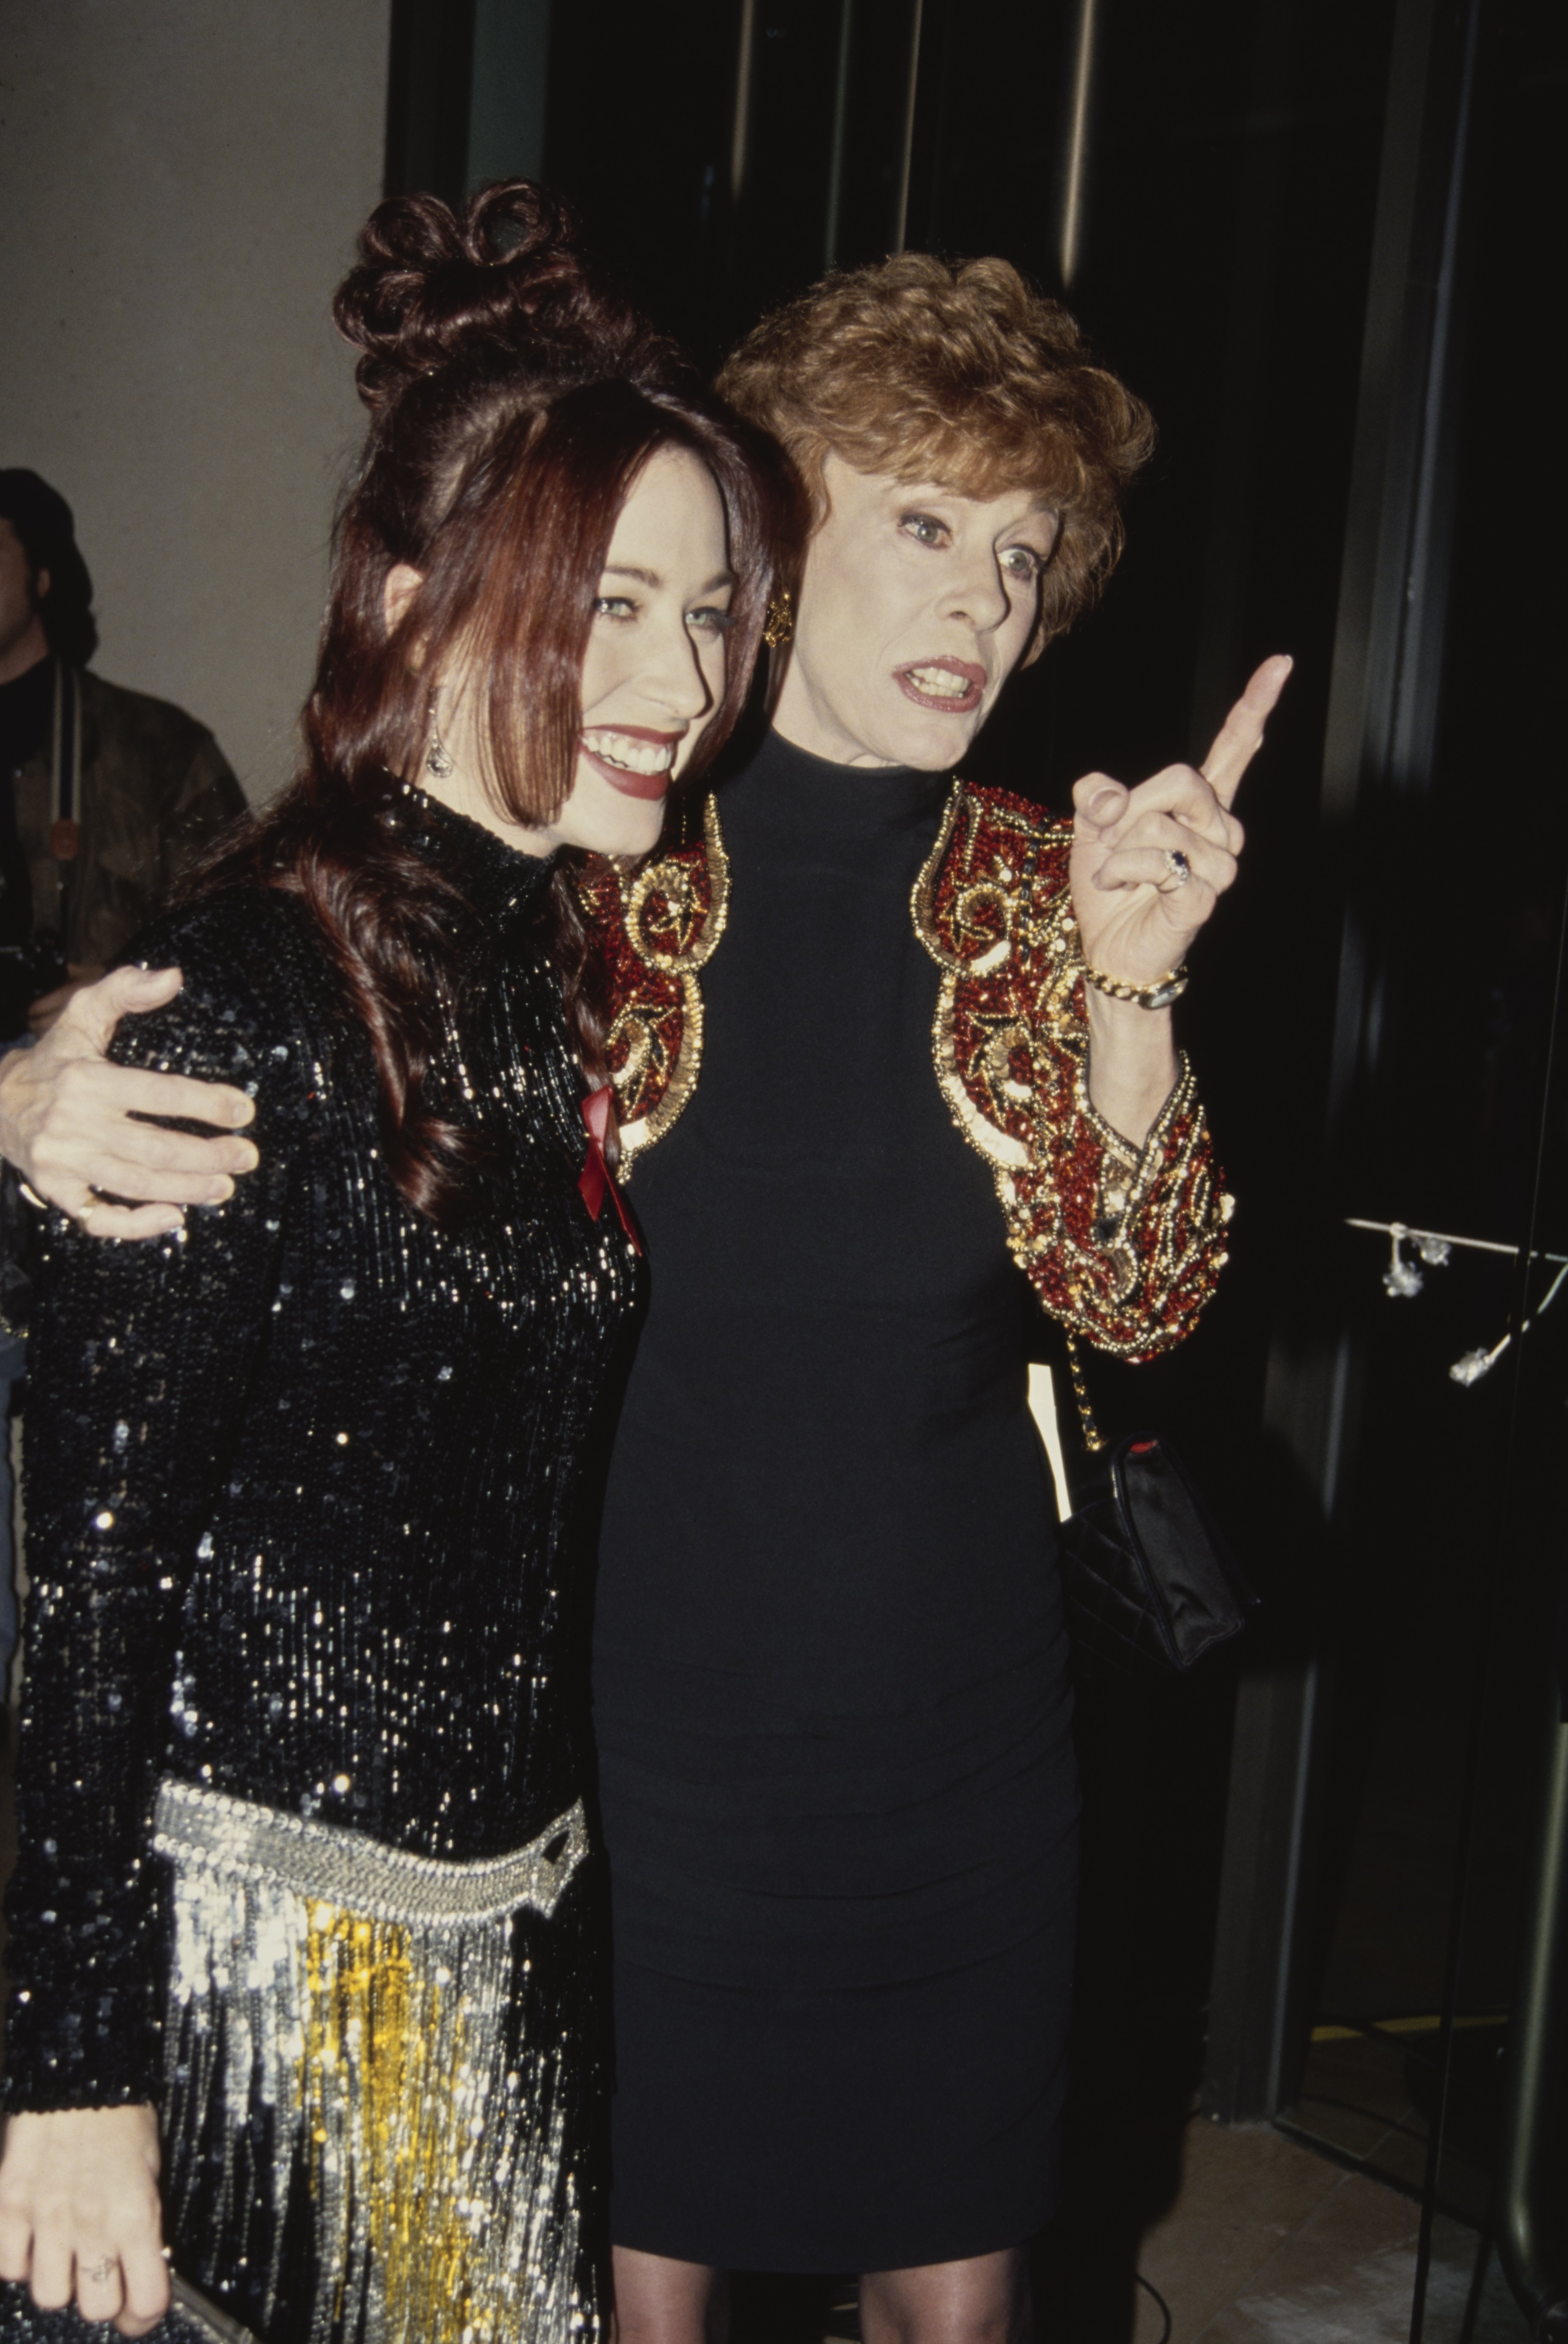 American singer-songwriter Erin Hamilton and her mother, comedian and actress Carol Burnett in Beverly Hills, California, 23rd January 1993. | Source: Getty Images